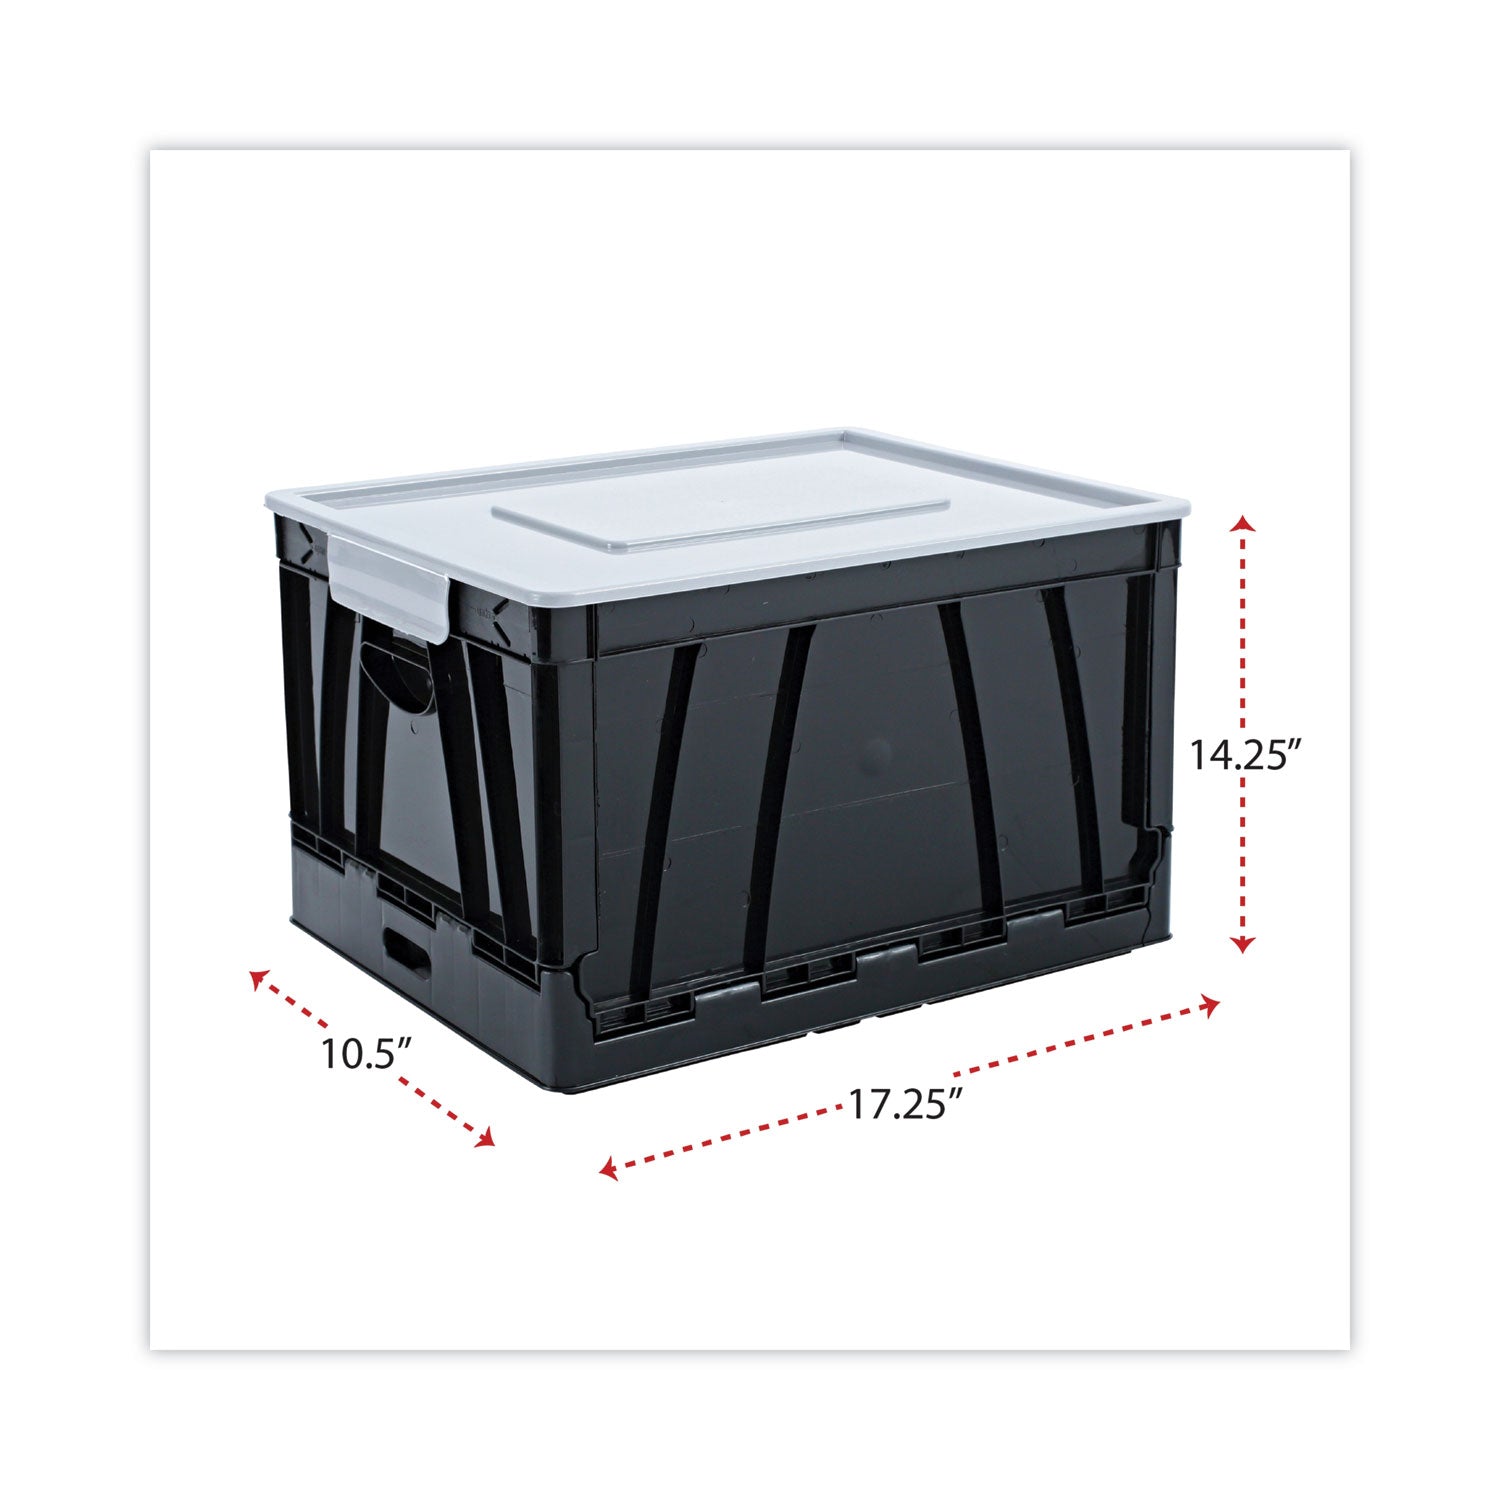 collapsible-crate-letter-legal-files-1725-x-1425-x-105-black-gray-2-pack_unv40010 - 2